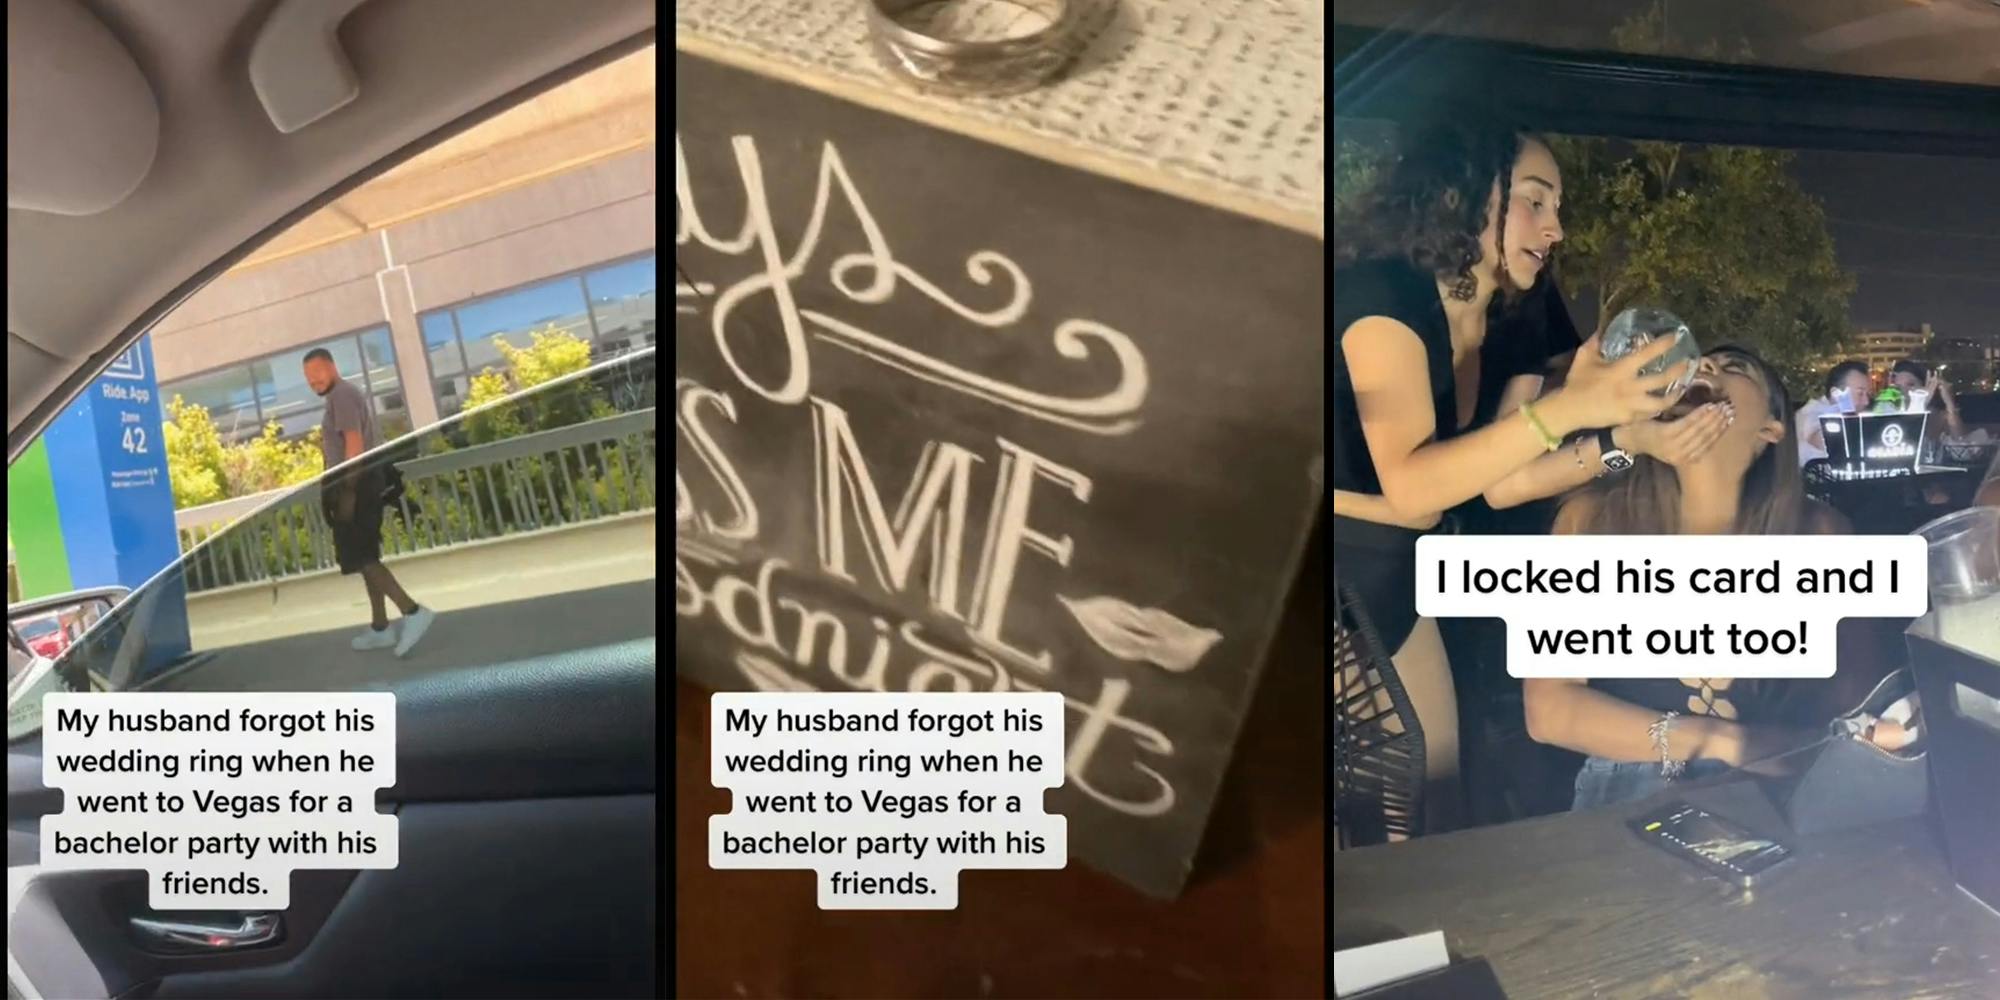 man walking into airport (l) wedding ring on table (c) both with caption "my husband forgot his wedding ring when he went to Vegas for a bachelor party", waitress pouring drink into woman's mouth with caption "I locked his card and I went out too!" (r)